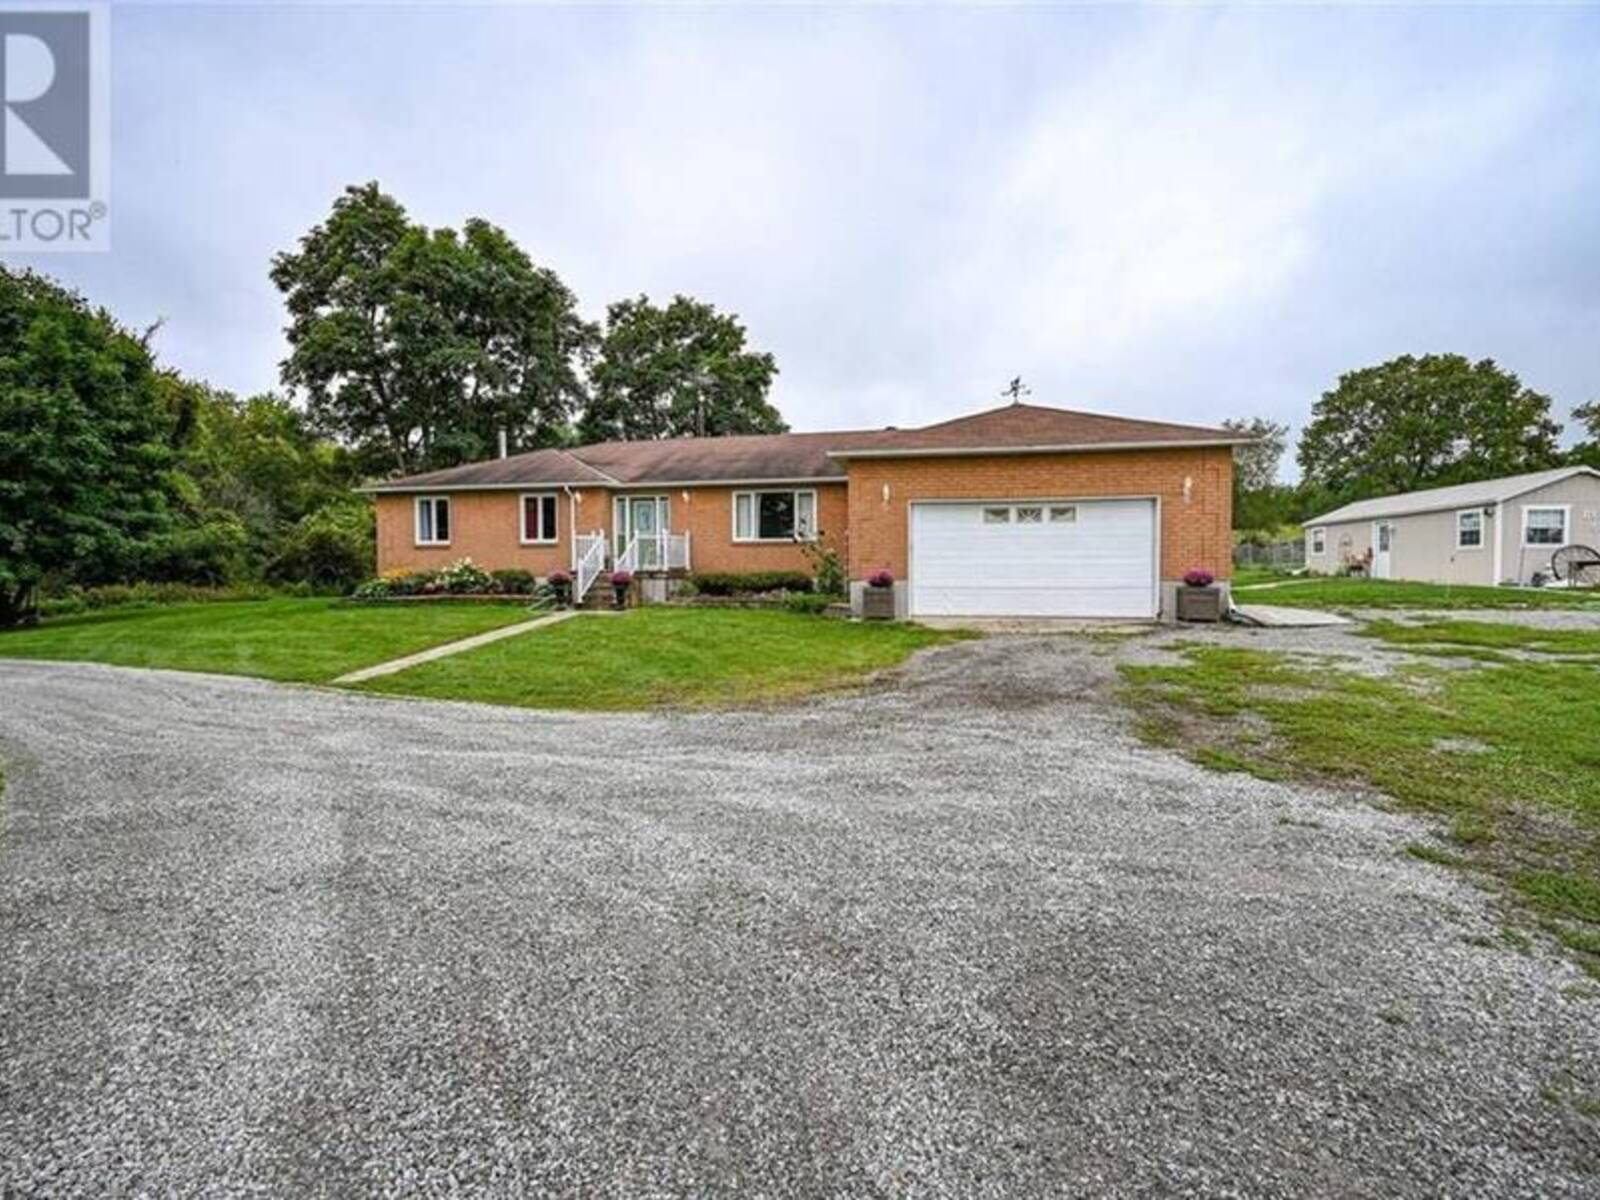 514 COUNTY RD 1 ROAD, Smiths Falls, Ontario K7A 4S5